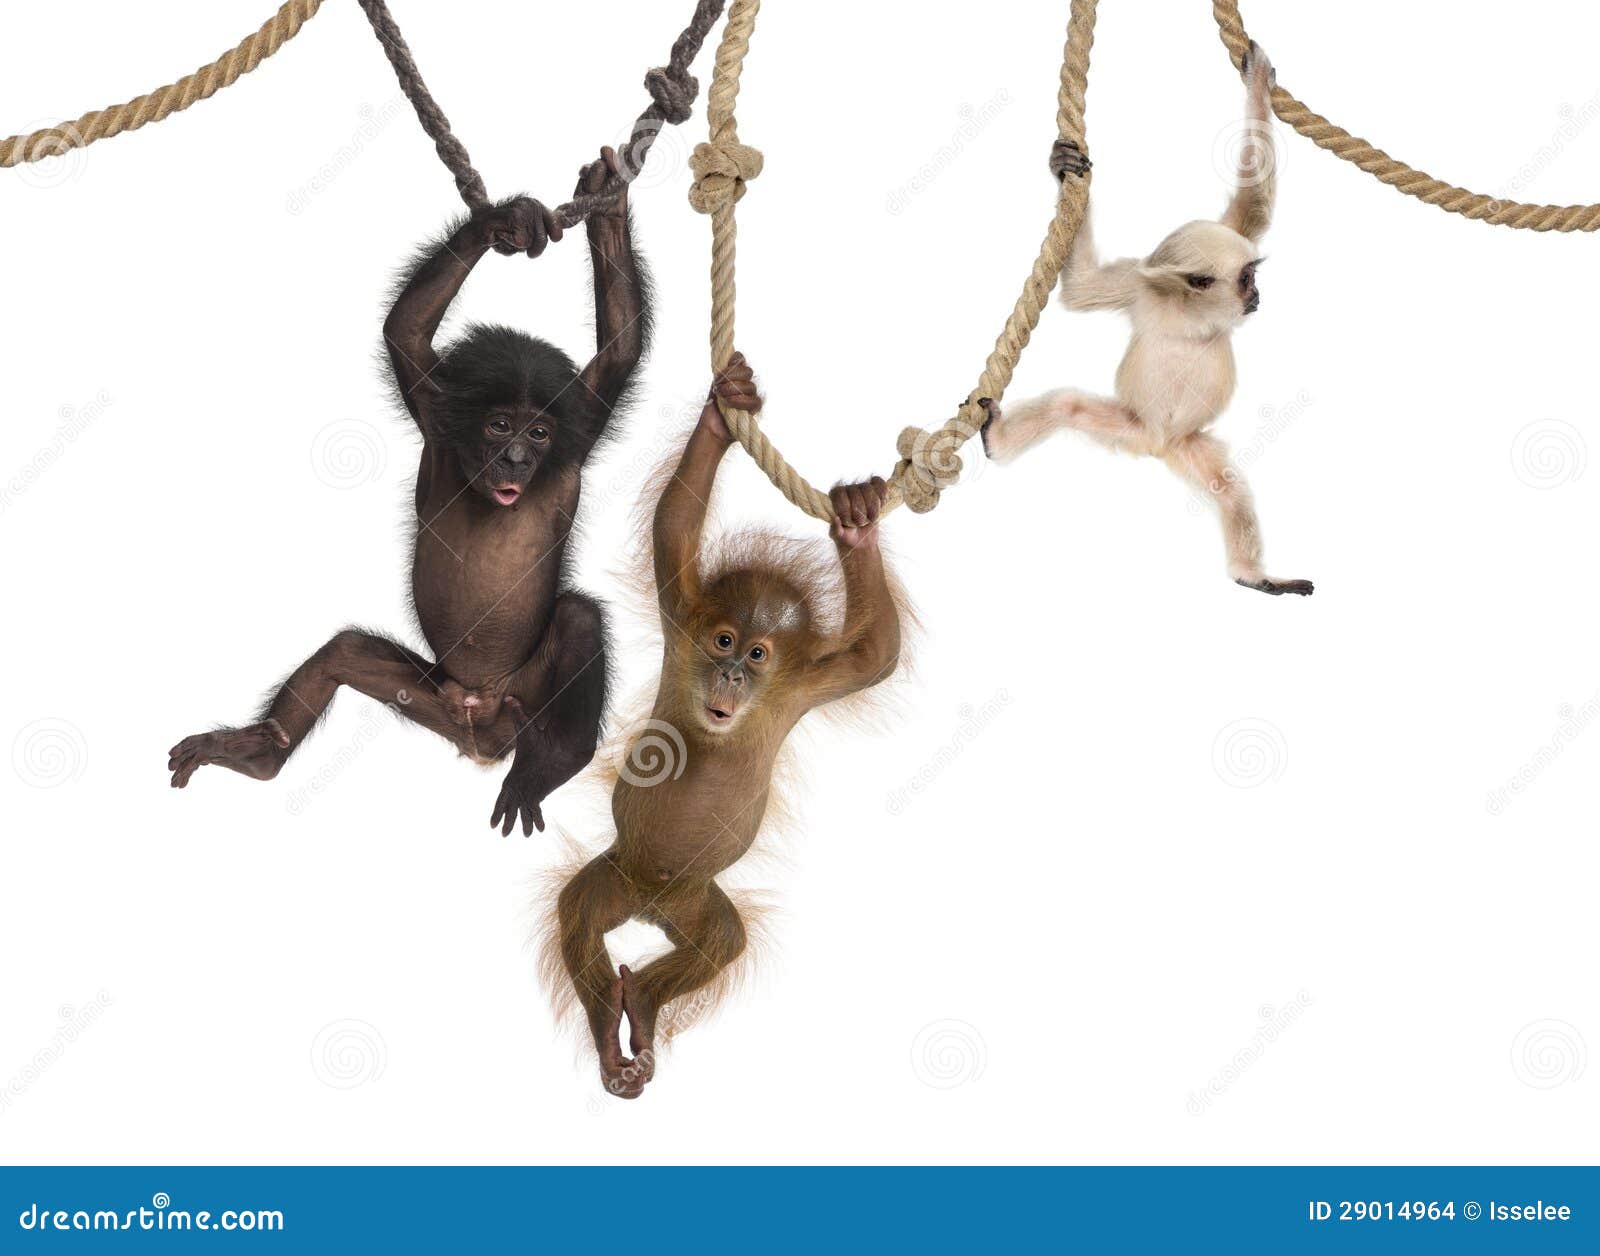 young orangutan, young pileated gibbon and young bonobo hanging on ropes